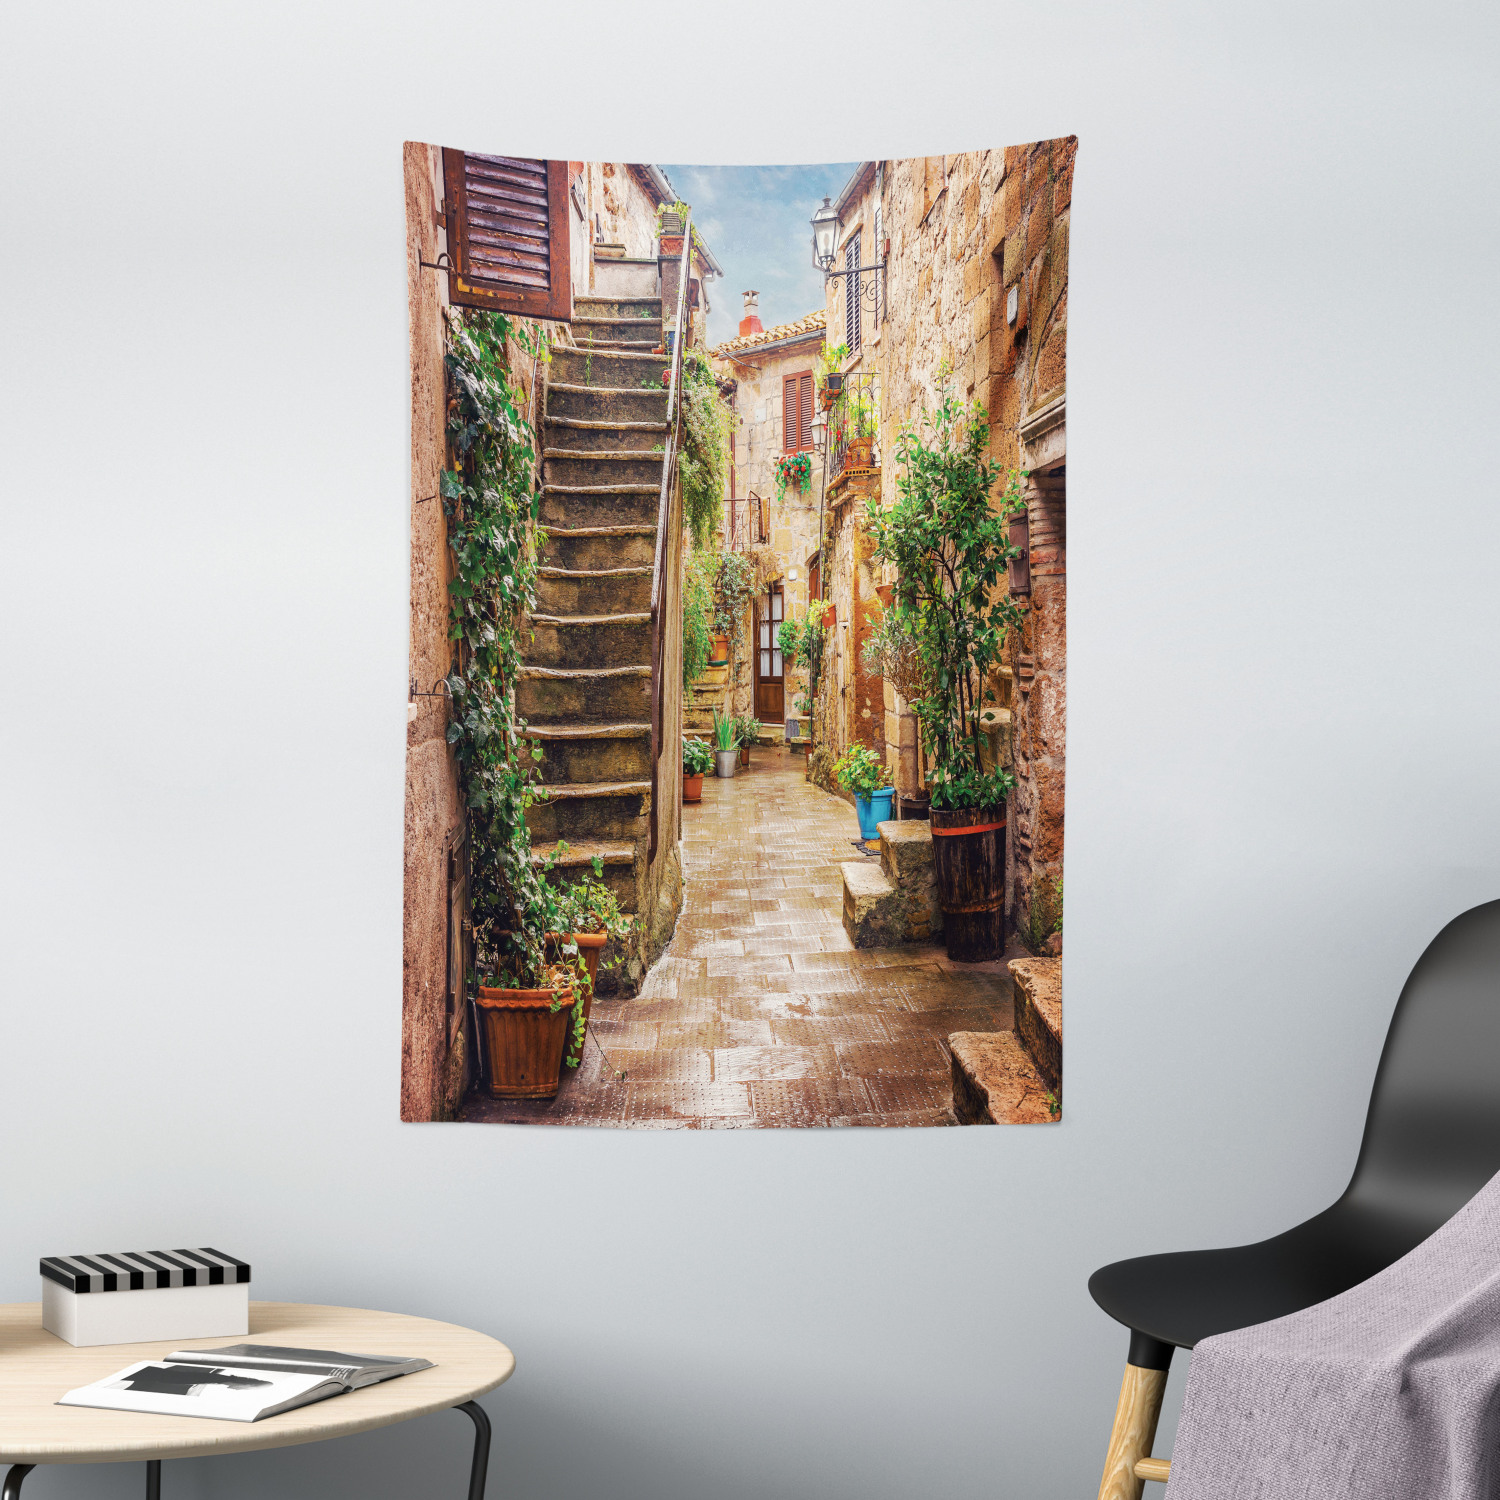 Italy Tapestry Old Houses Print Wall Hanging Decor eBay